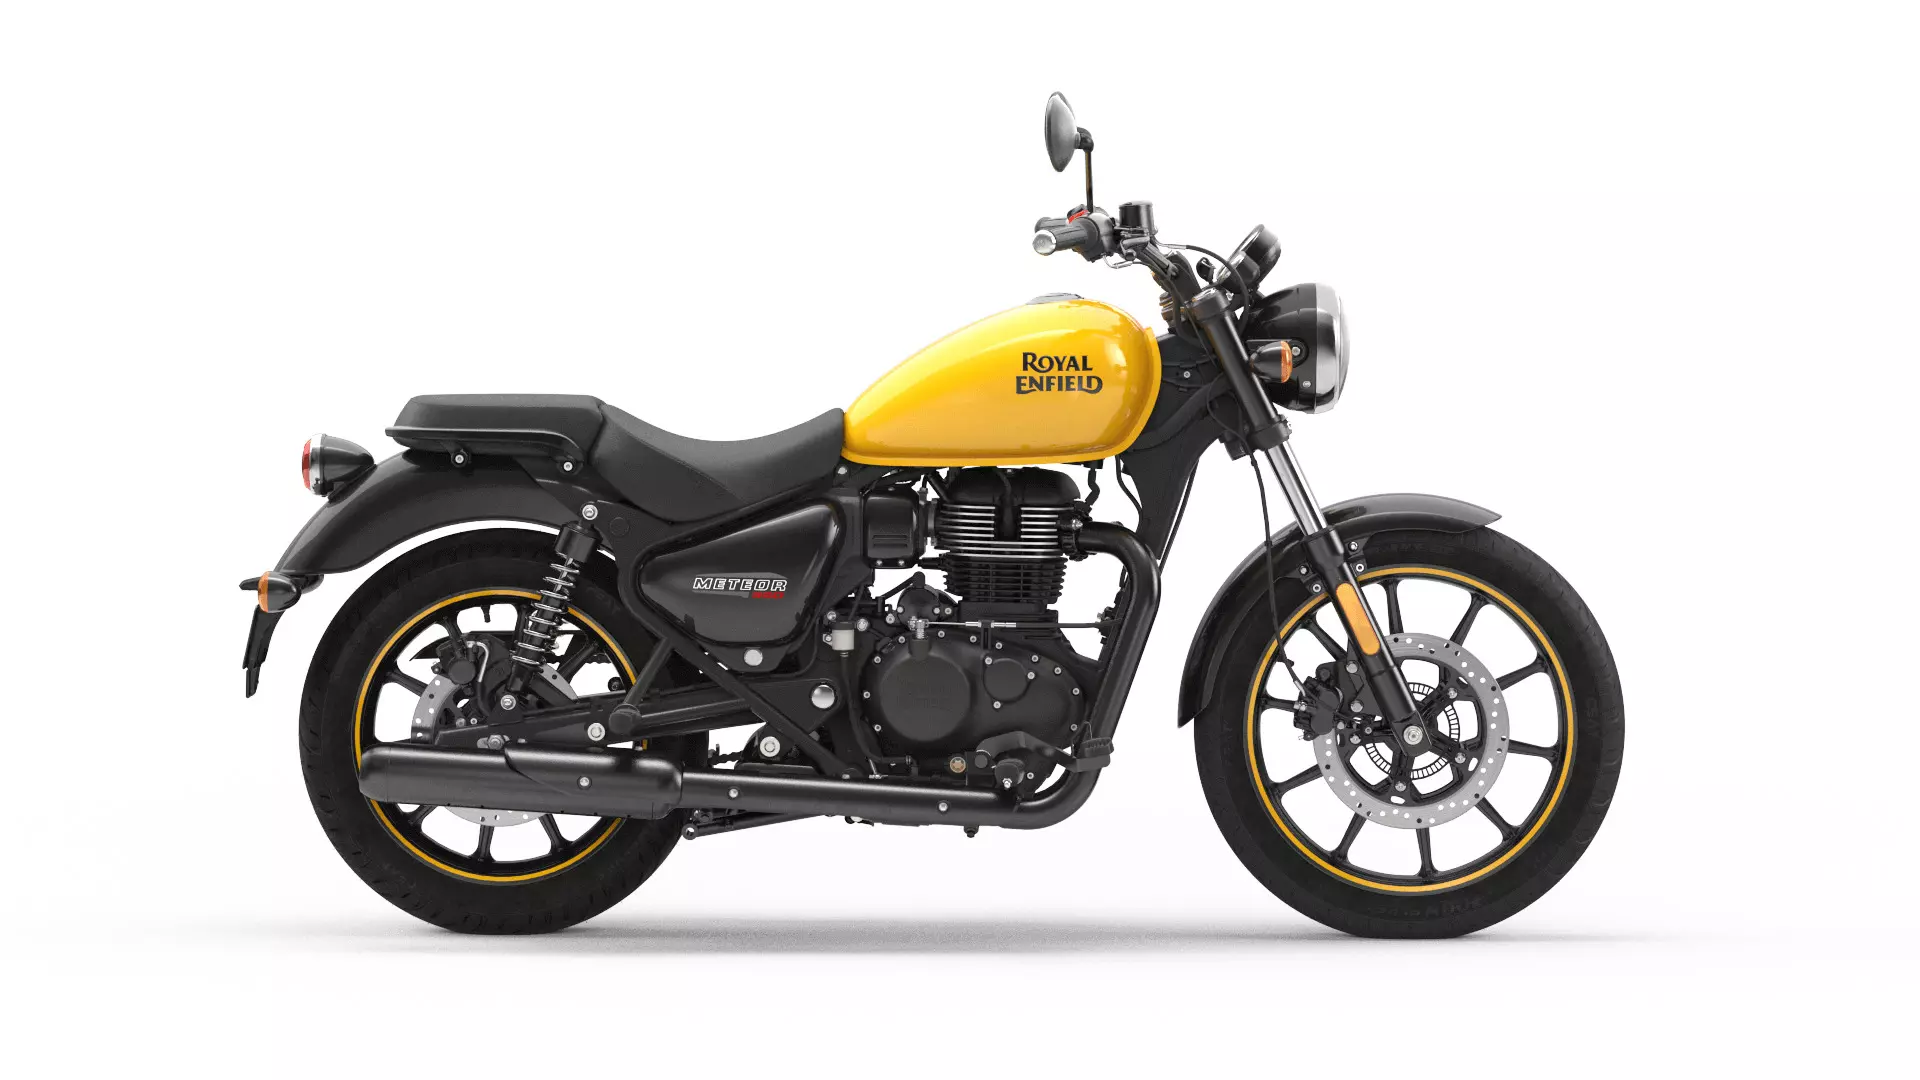 Royal Enfield to invest Rs 3,000 cr in Tamil Nadu for development of new products